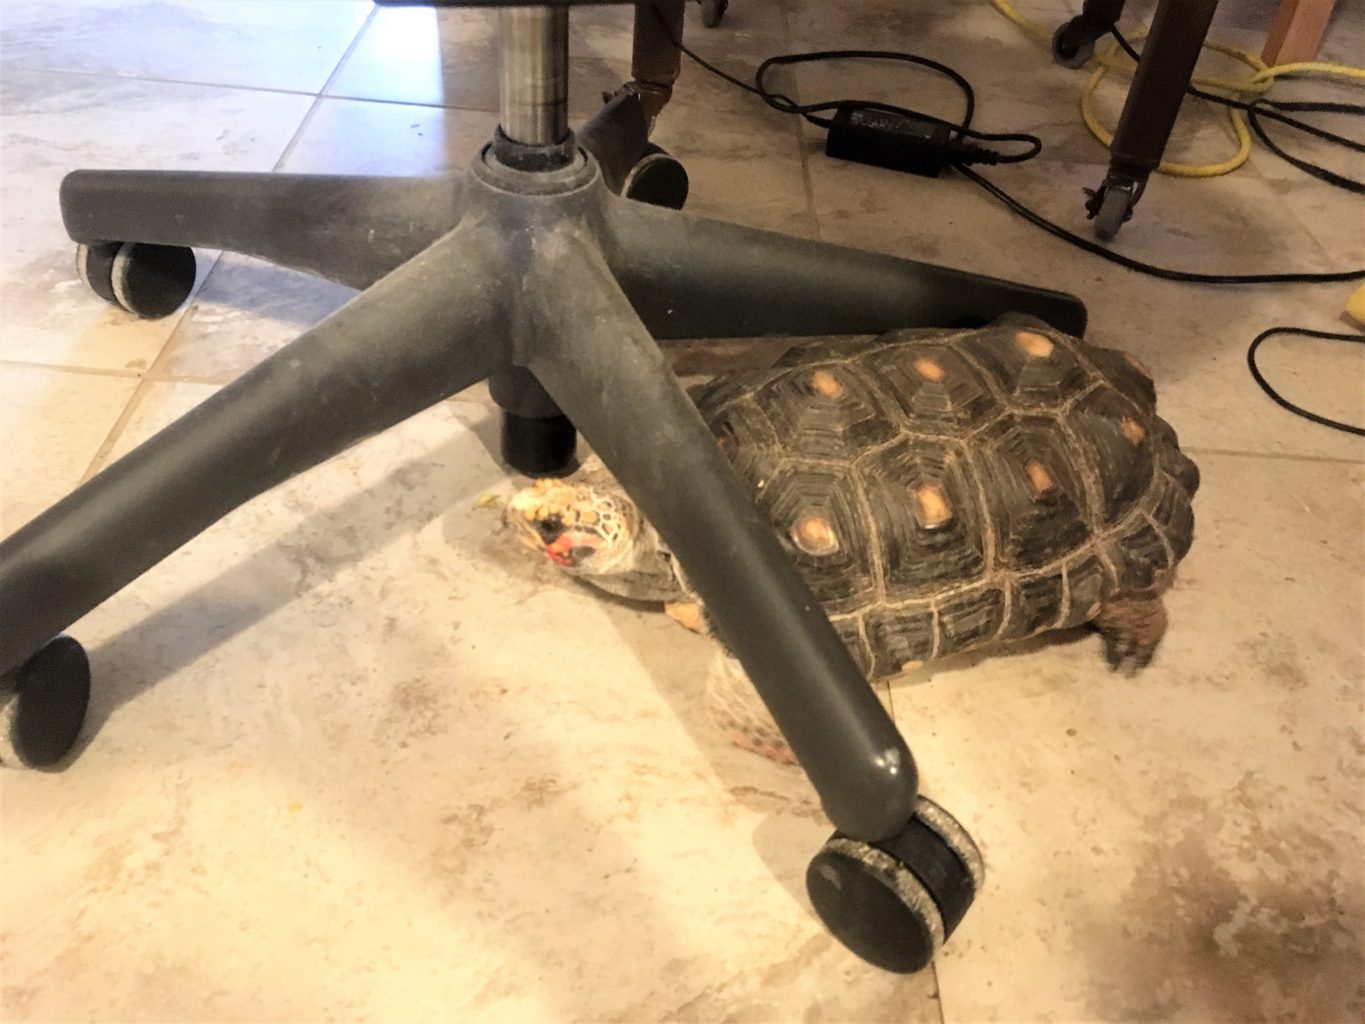 A Red-foot tortoise pushing a desk chair on wheels away from table